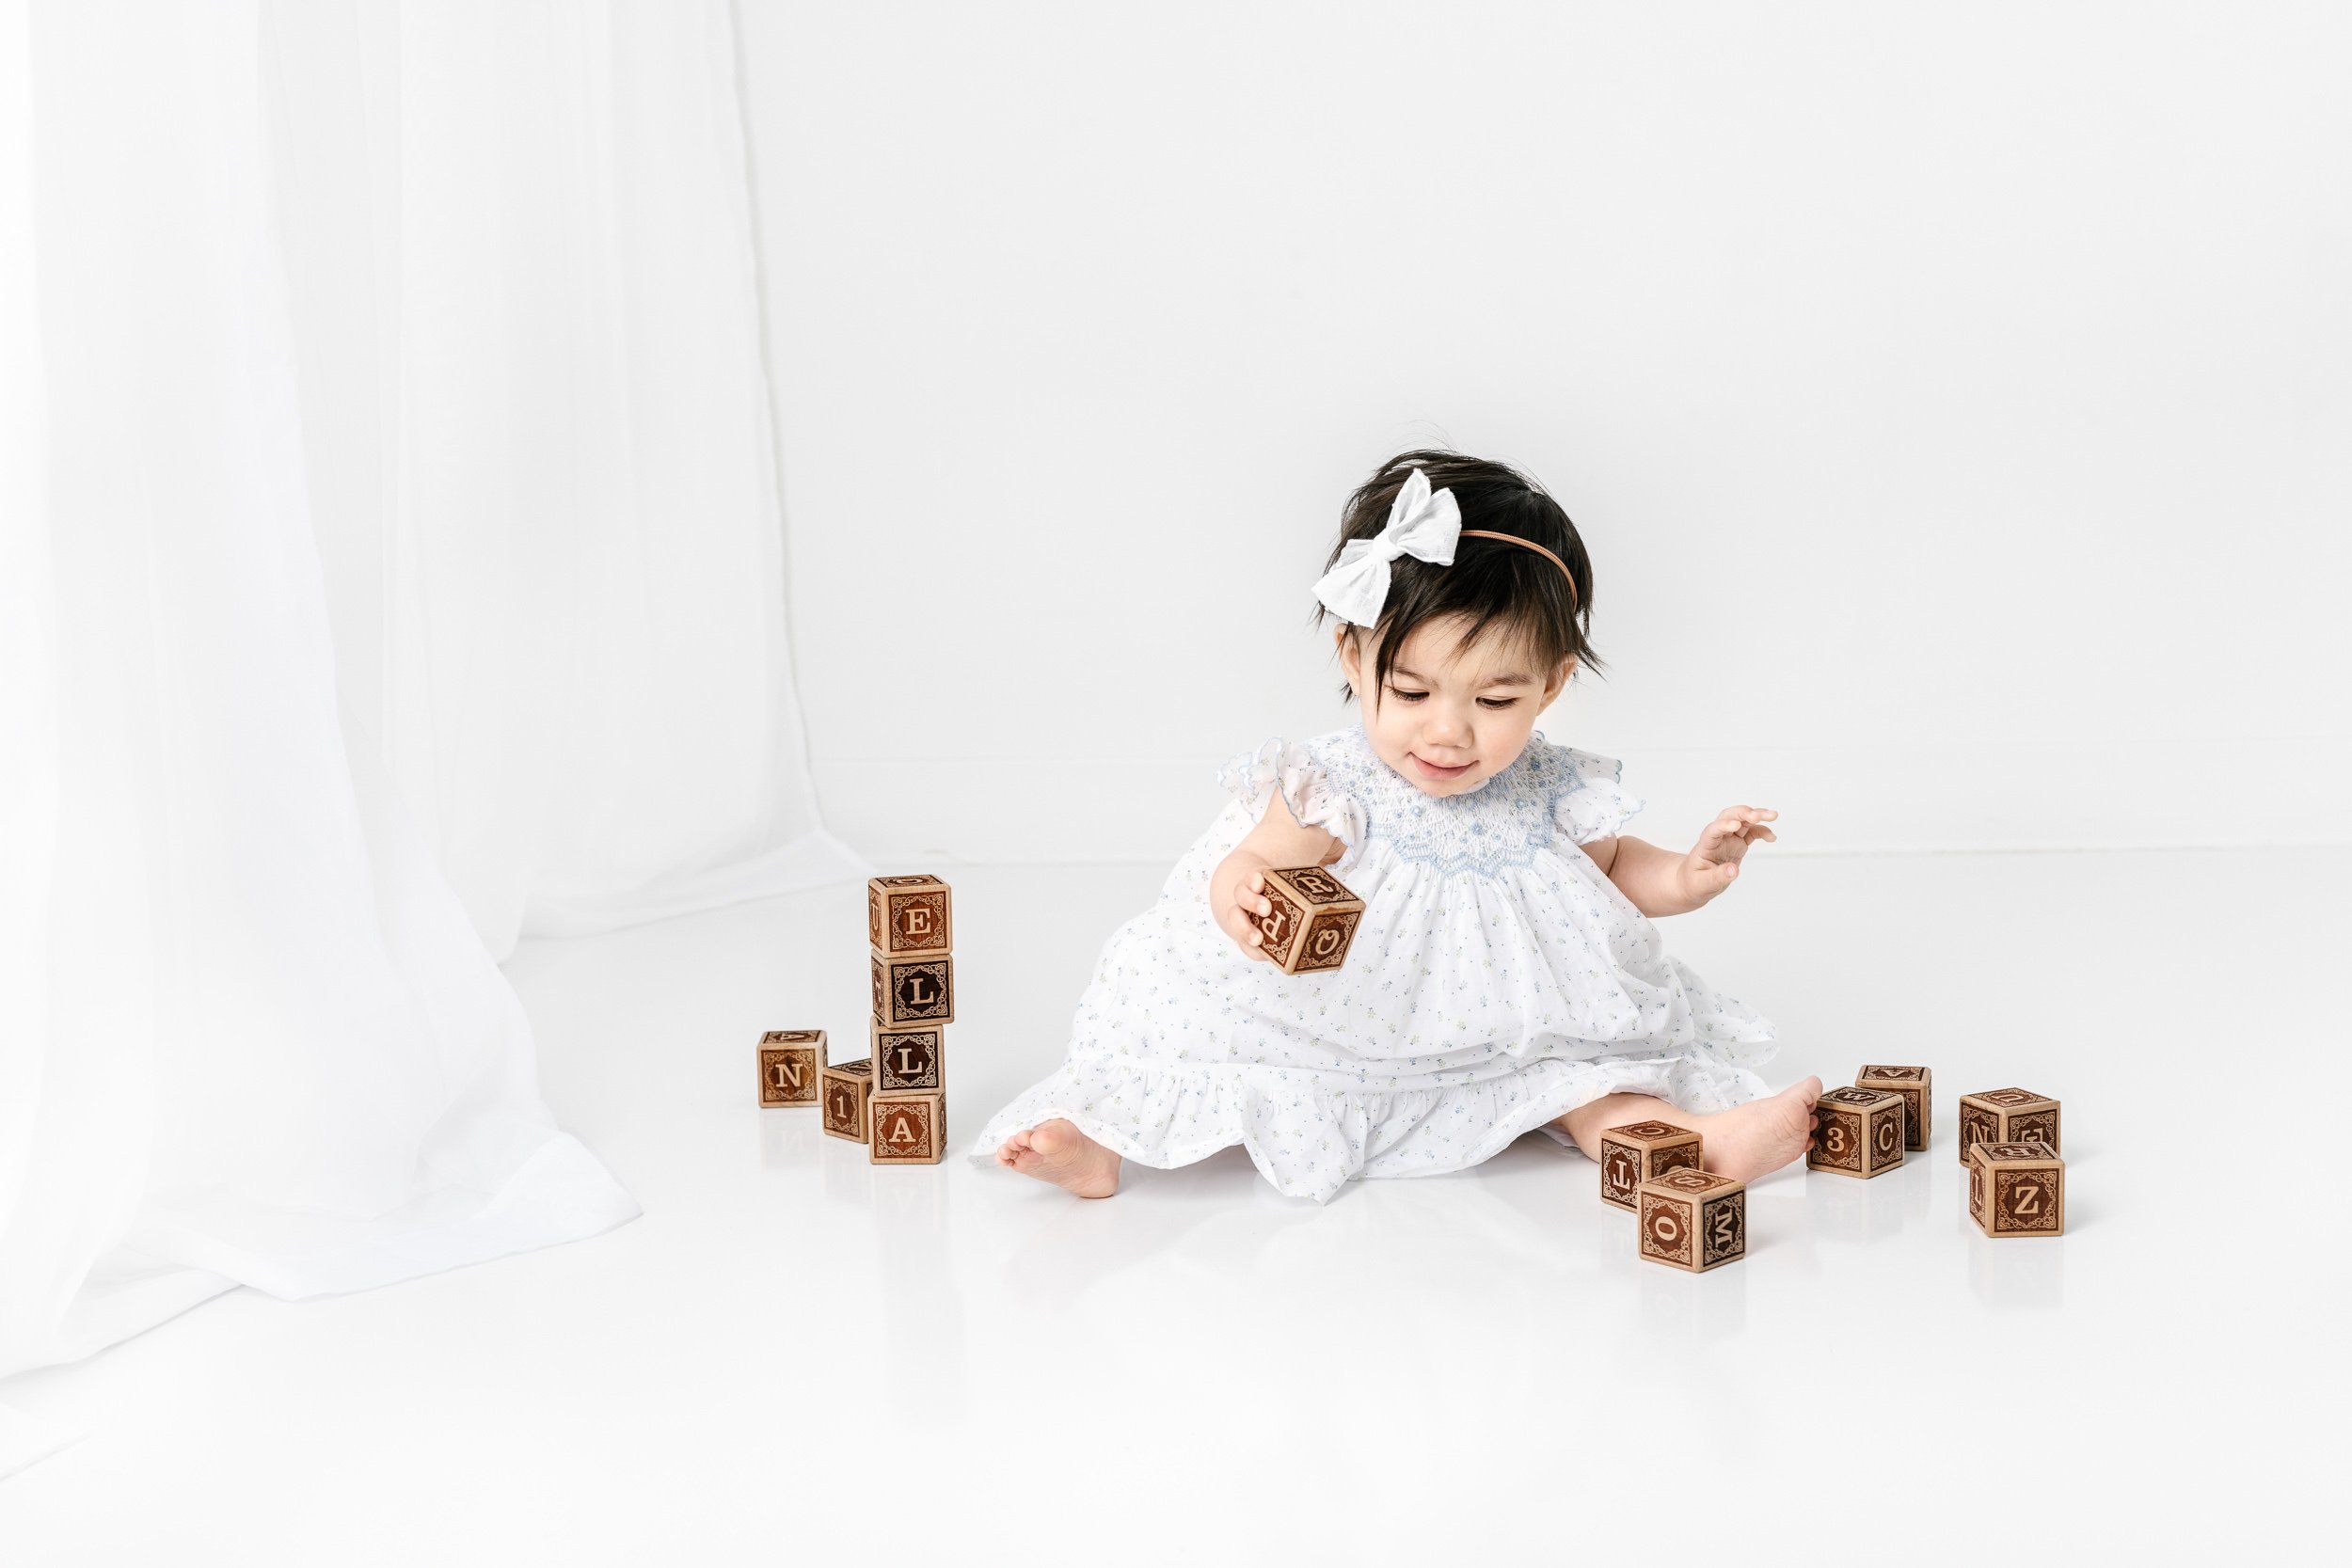  Baby girl with wooden letter blocks playing on the floor captured by Nicole Hawkins Photography in NJ. wooden block baby portraits #nicolehawkinsphotography #nicolehawkinsbirthday #nicolehawkinsportraits #NJstudiophotography #1stbirthday 